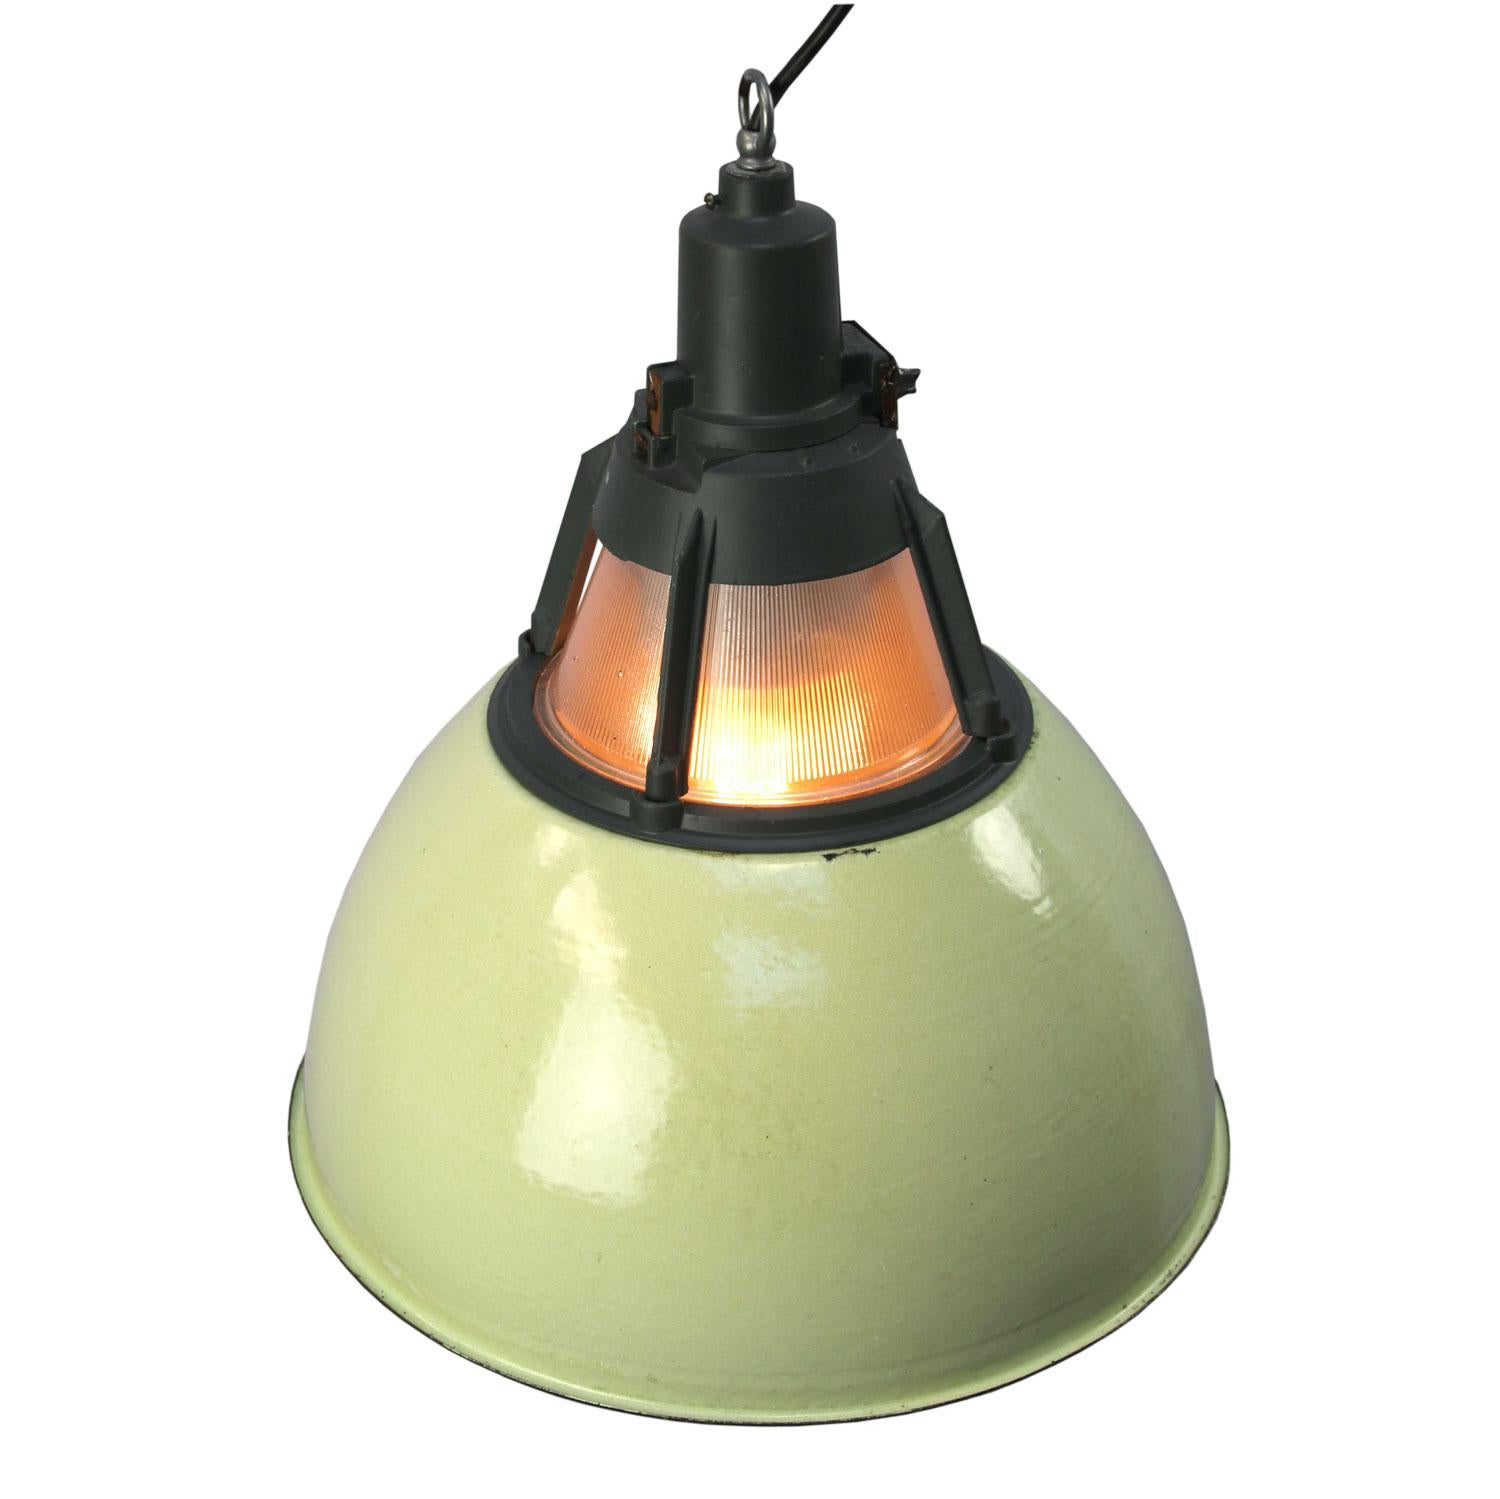 Enamel Industrial pendant.
Yellow green enamel shade, white inside.
Dark grey cast aluminium top with Holophane glass

Weight: 3.5 kg / 7.7 lb

Priced per individual item. All lamps have been made suitable by international standards for